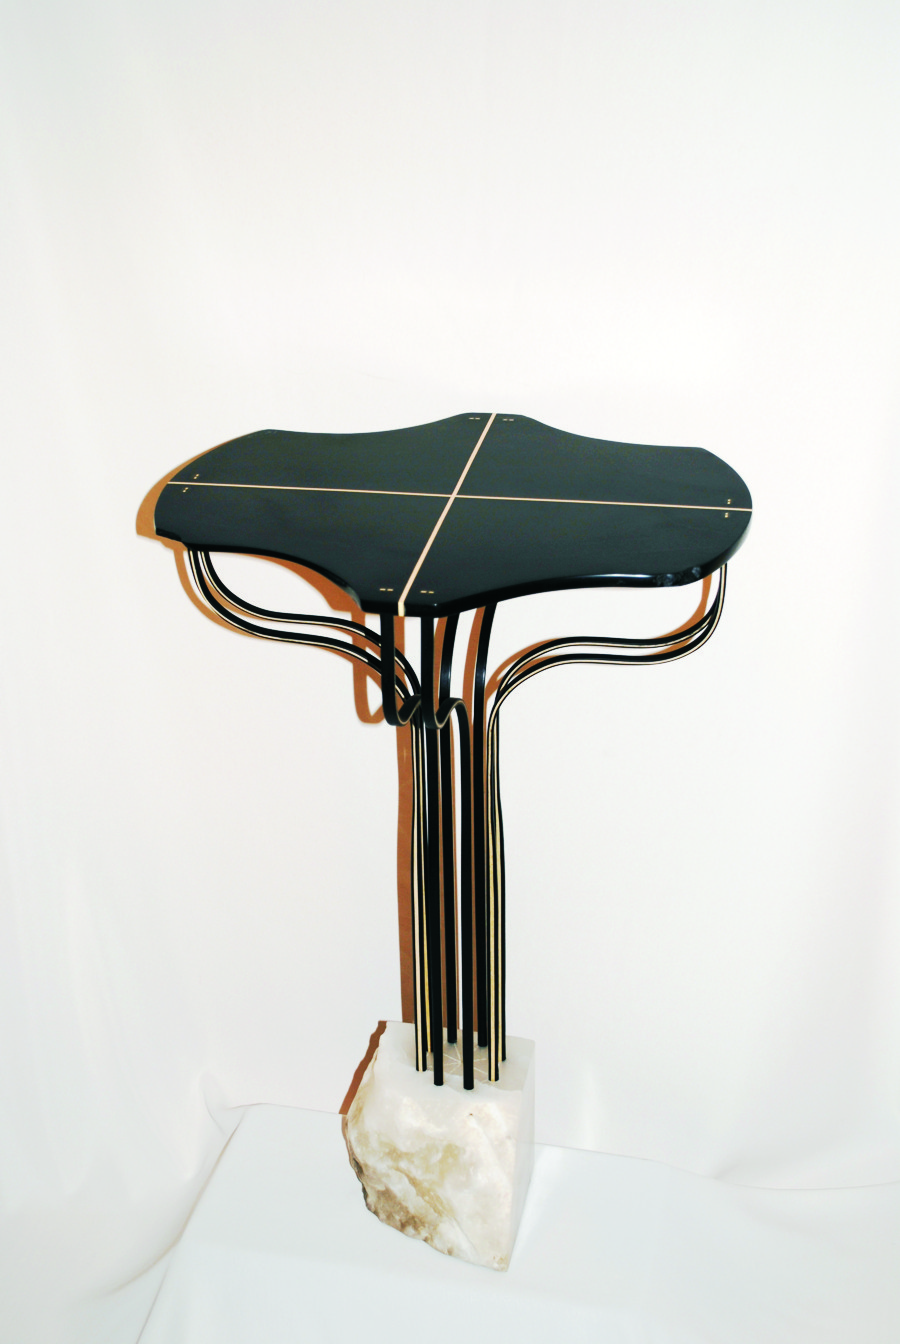 Stand No. 1, 2010—The Holly and Ebony legs to this piece were glued with WEST SYSTEM Epoxy. The Black Chlorite and Holly top was also glued with WEST SYSTEM Epoxy. The base is Italian White Alabaster.